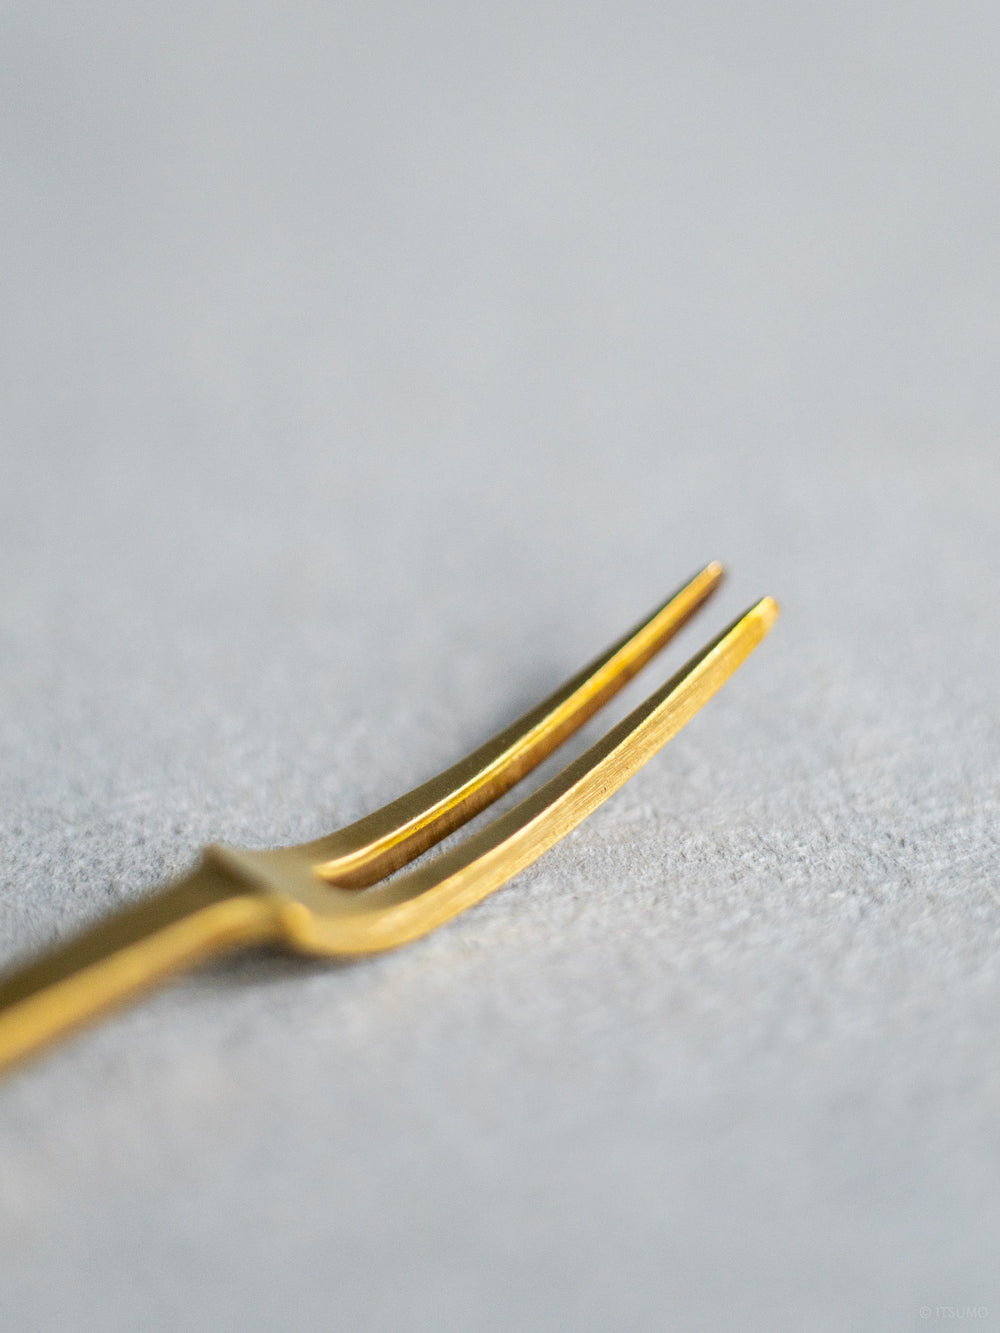 Close up view of the two prong Azmaya brass fork